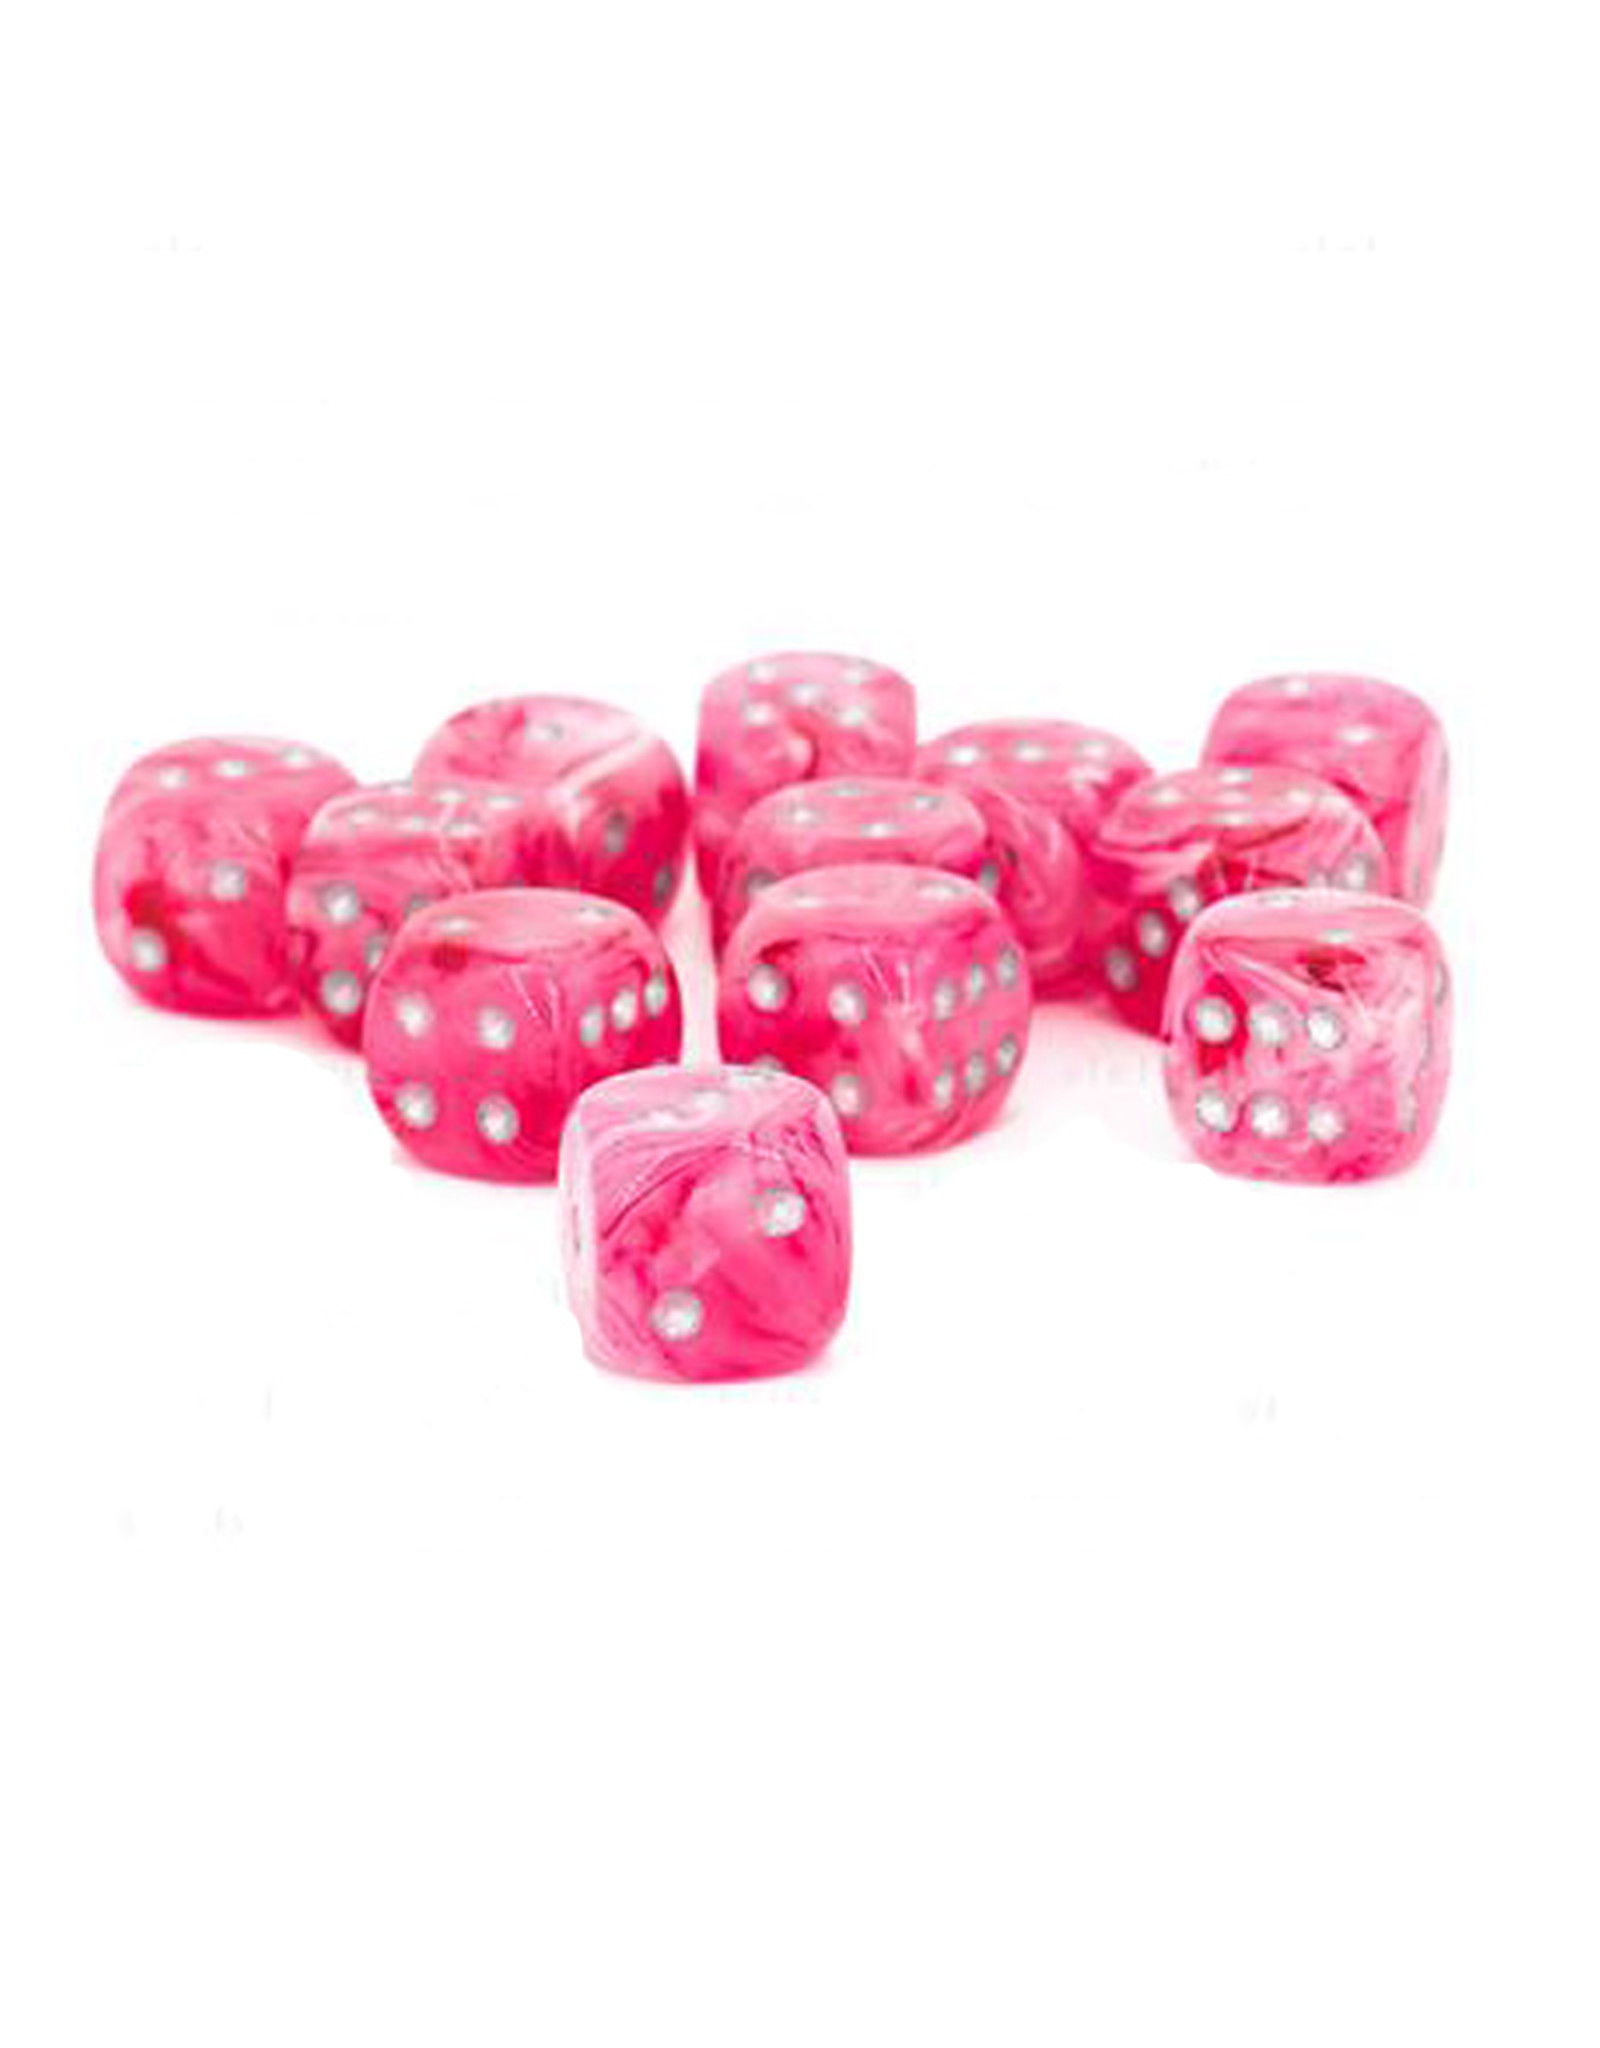 Chessex 16MM D6 Dice Set CHX27724 Ghostly Glow Pink/Silver